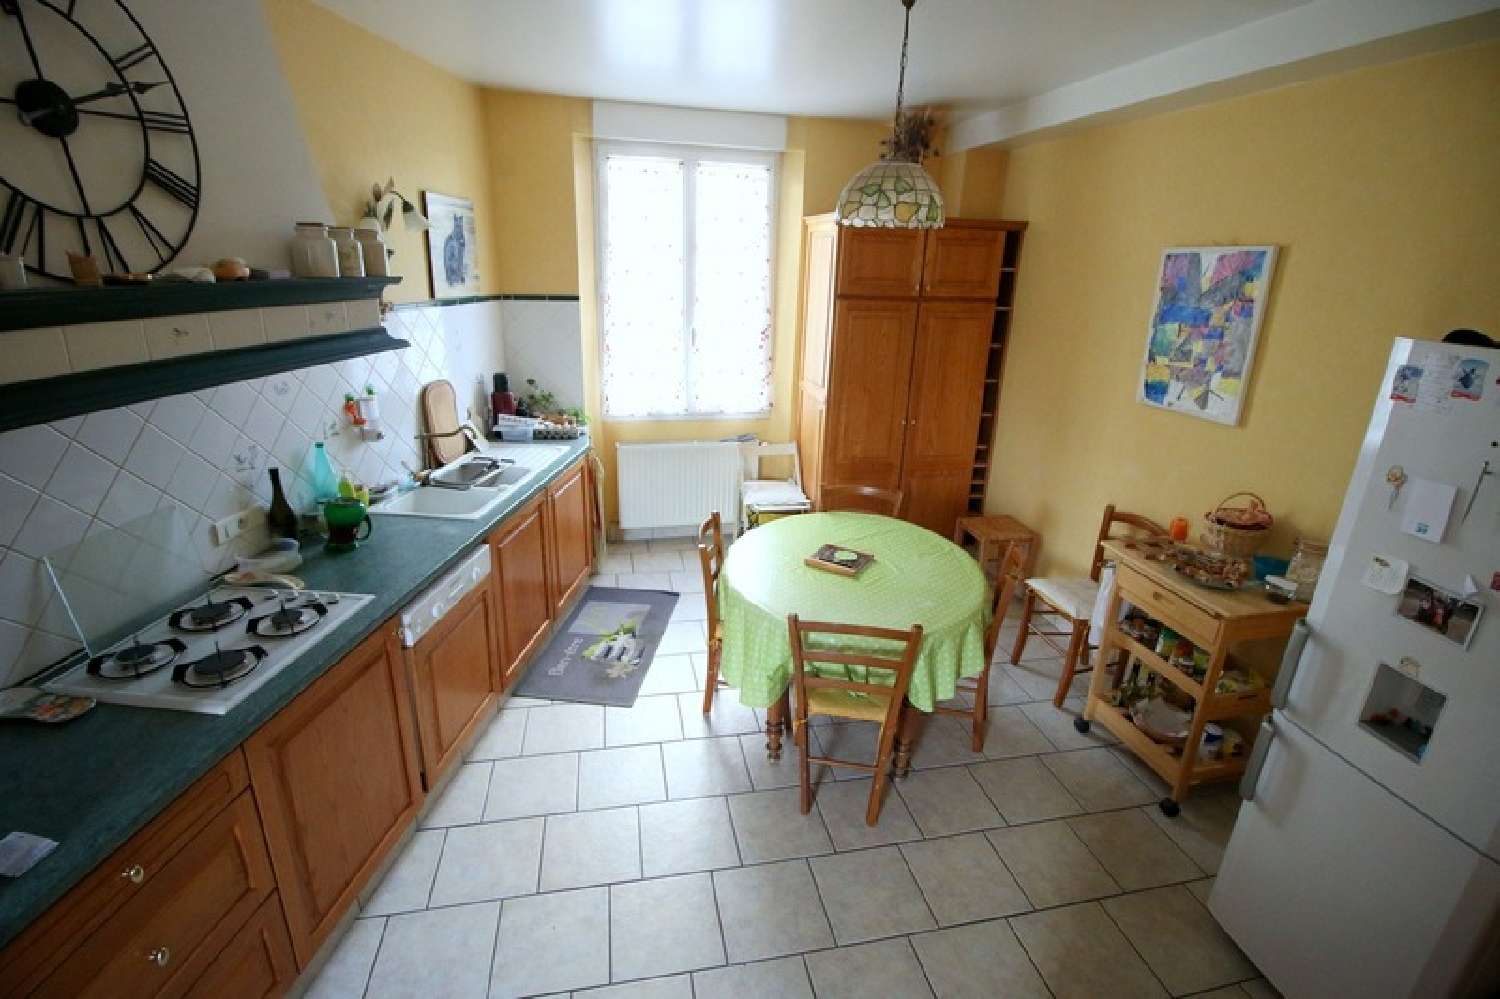  for sale village house Pierry Marne 7